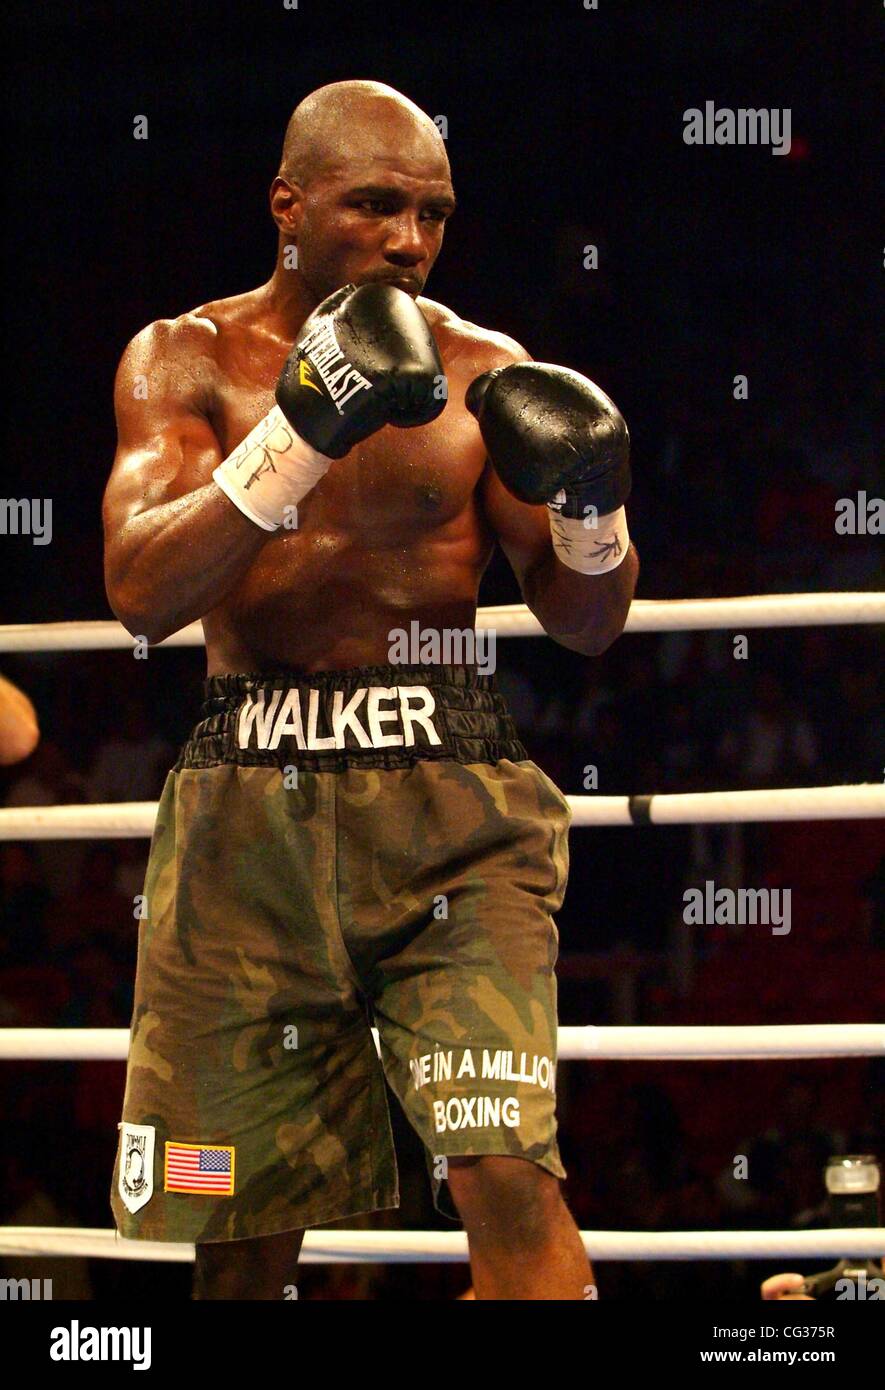 Michael 'Midnight Stalker' Walker fight for Special Middleweight attraction at American Airlines Arena Miami, Florida - 17.12.10 Stock Photo